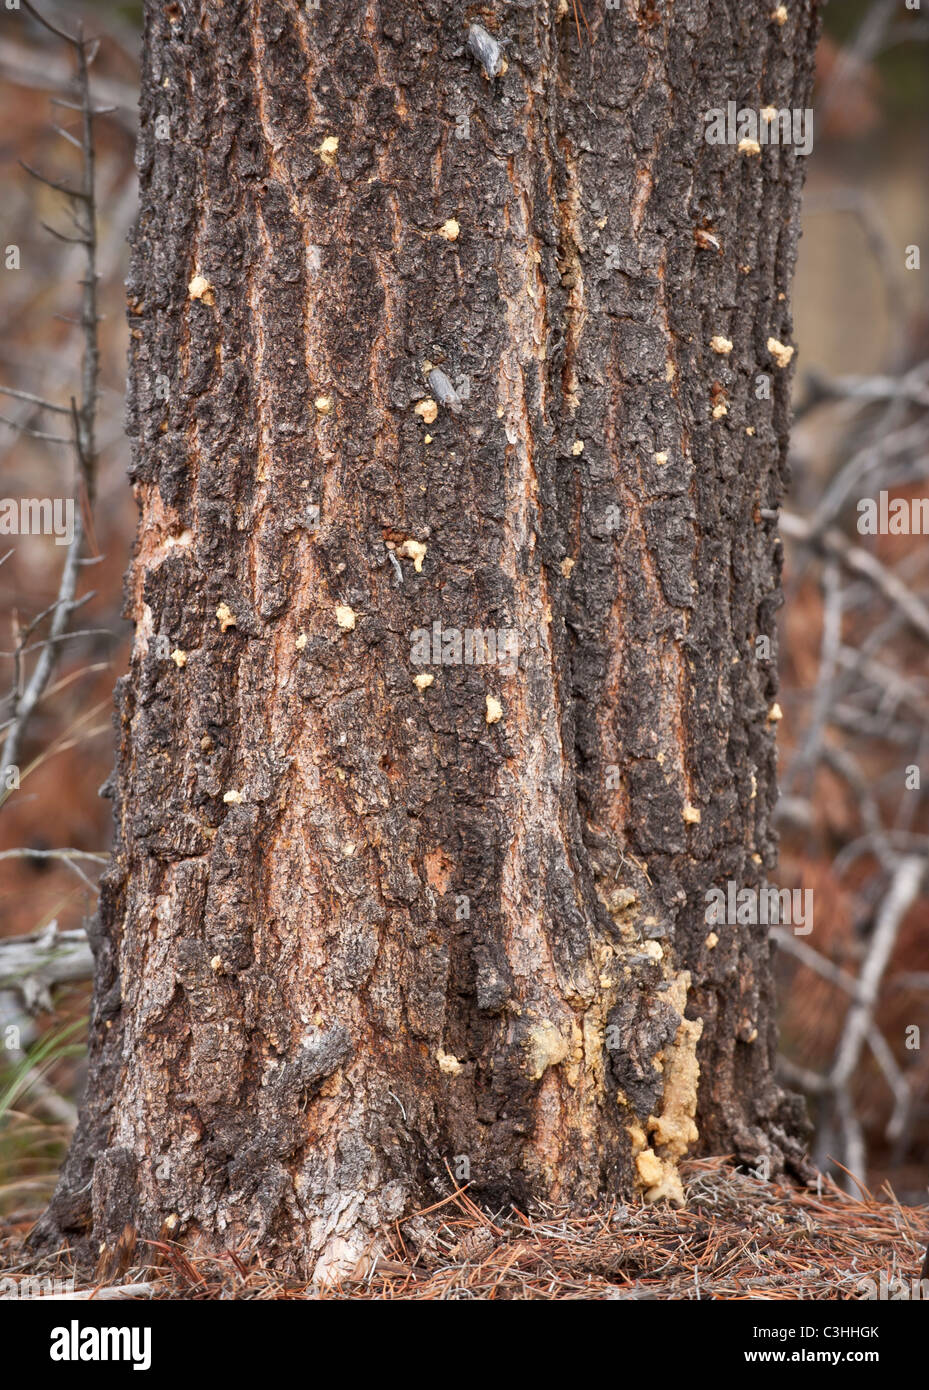 A lodgepole pine infested with Mountain Pine Beetle  is evidenced by the pitch balls on the trunk. Stock Photo